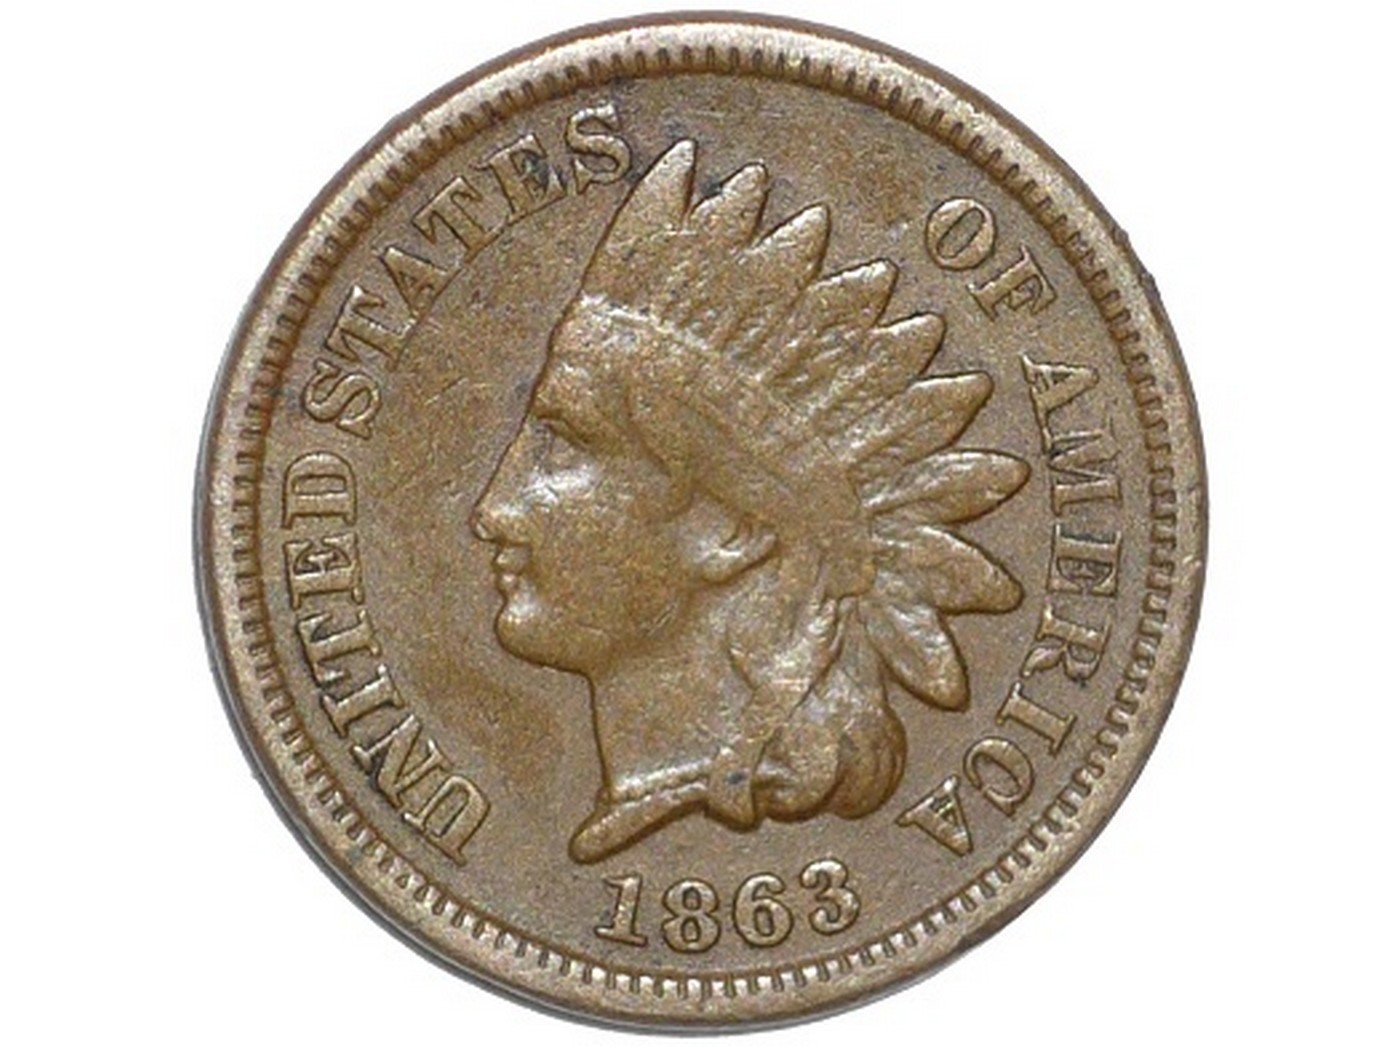 1863 Obverse of CUD-022 - Indian Head Penny - Photo by David Poliquin